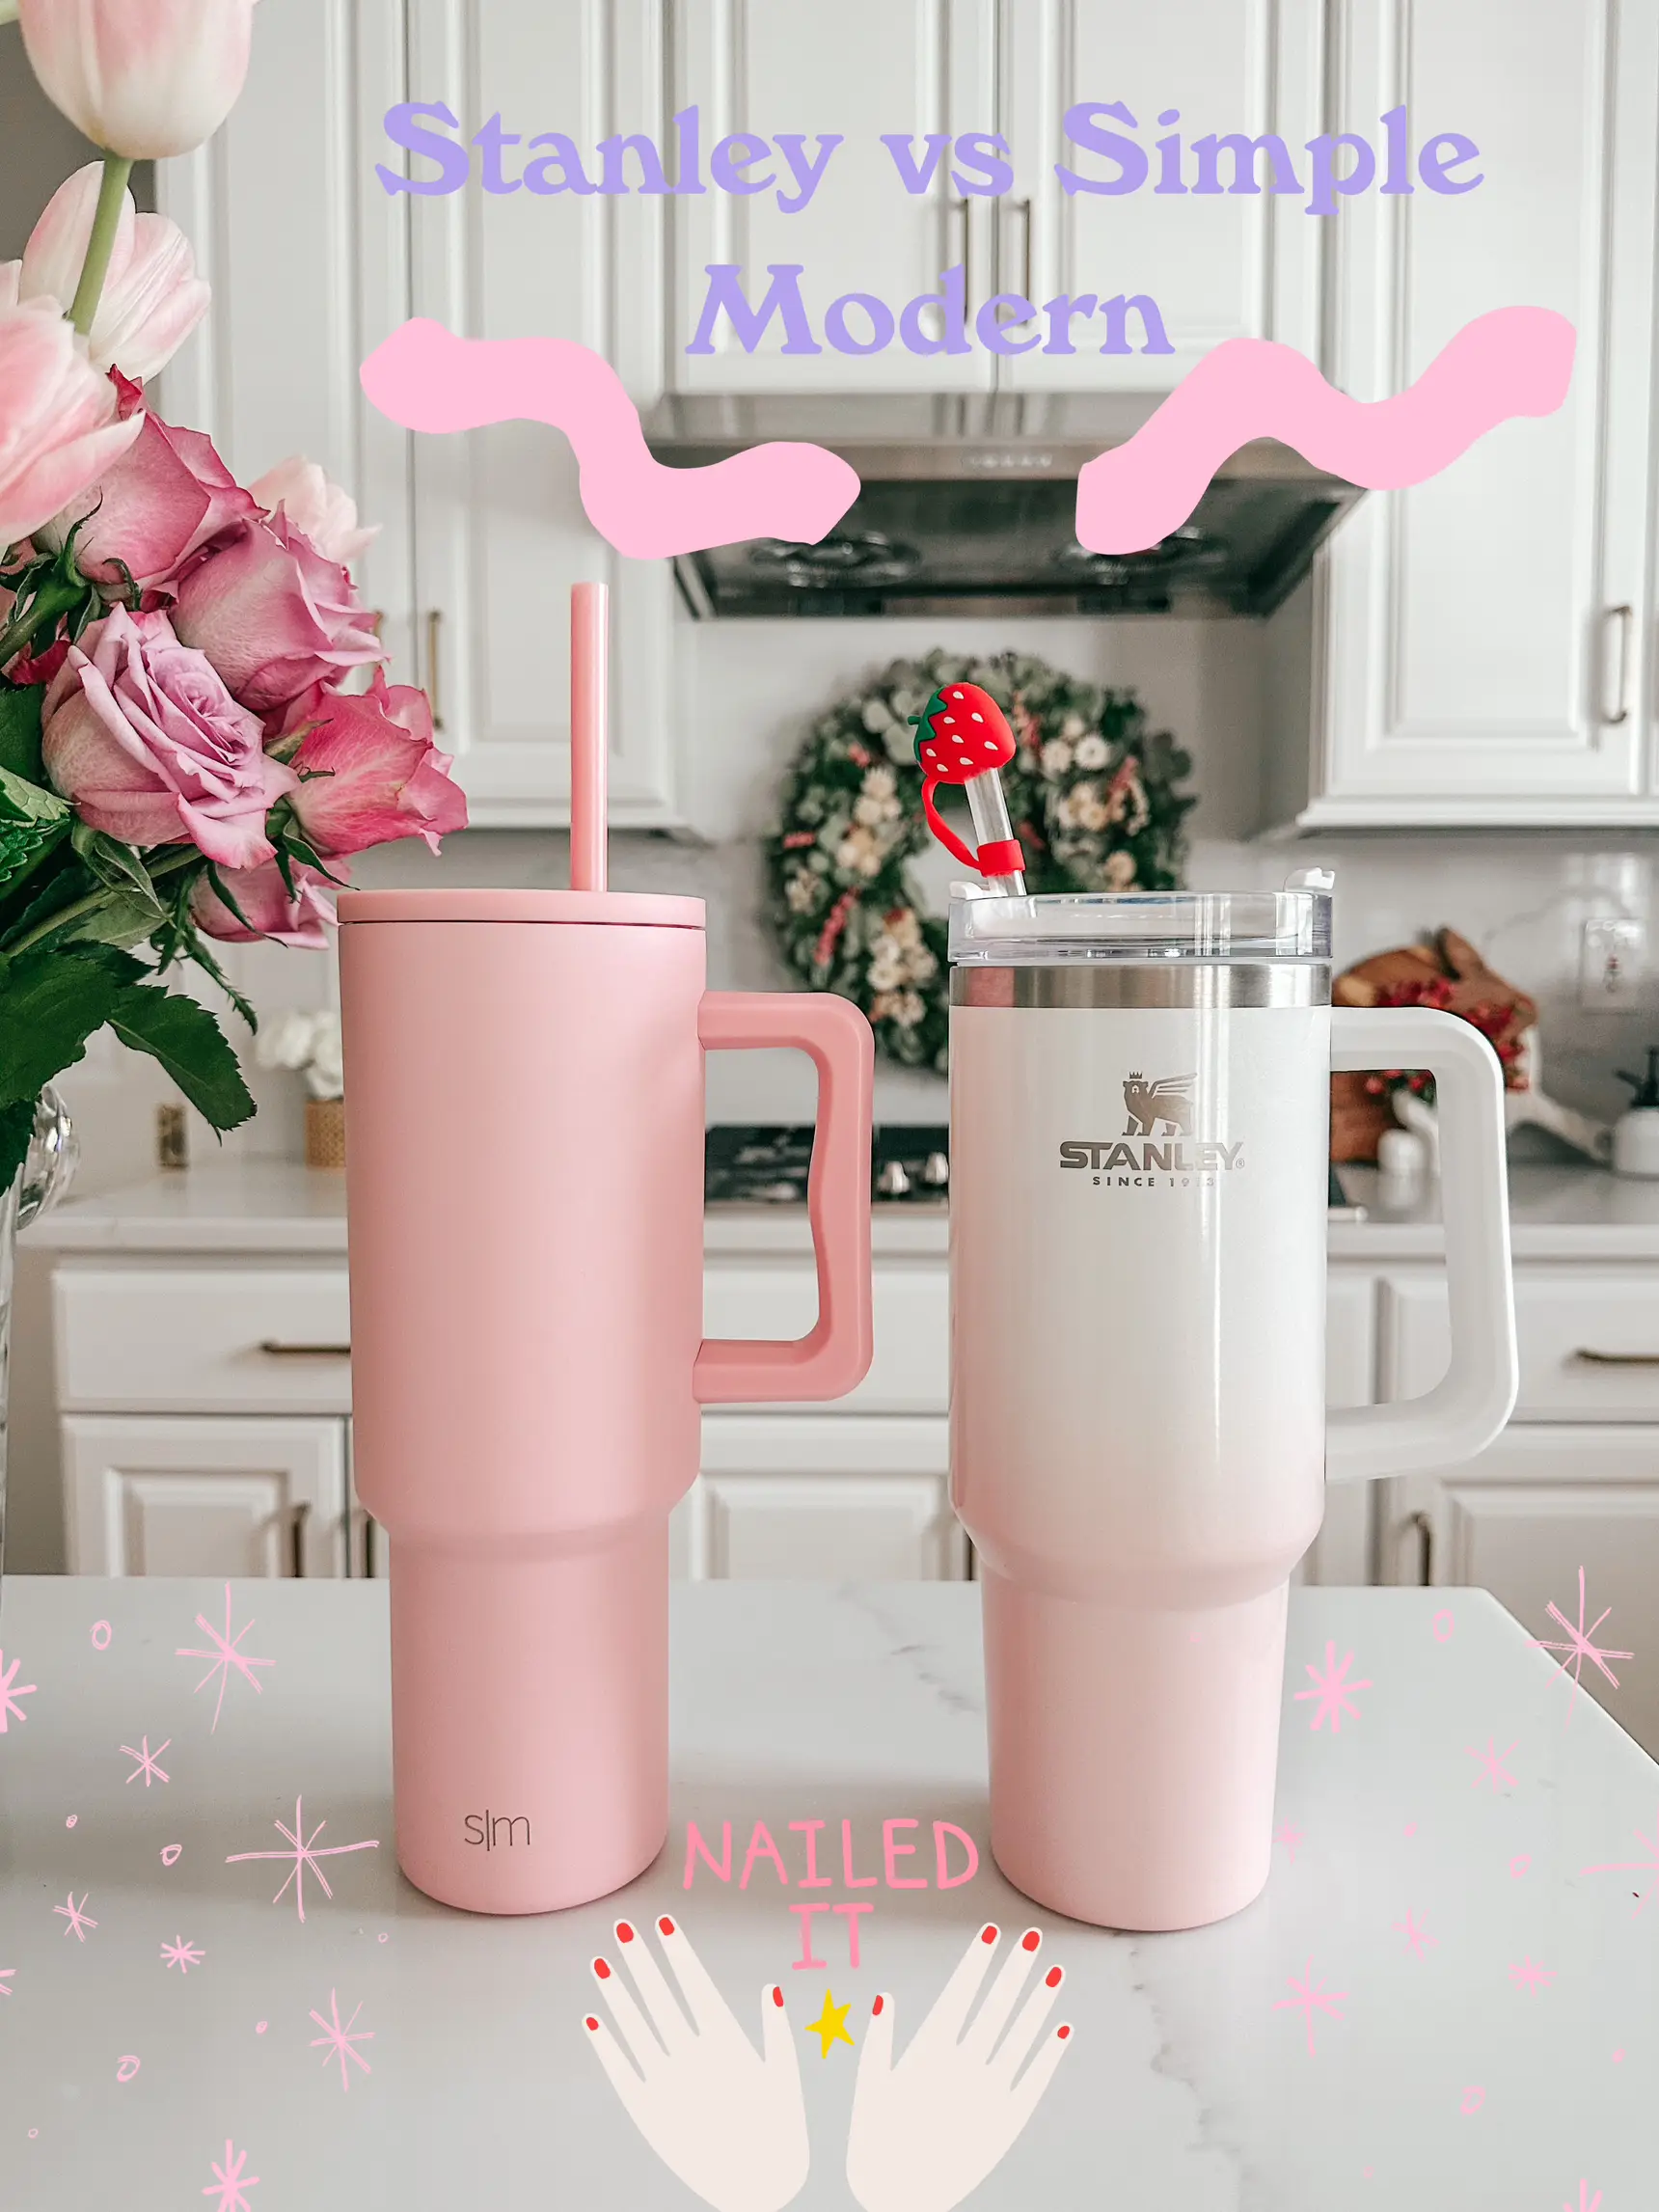 Simple Modern Tumbler Review, Gallery posted by MirandaJ.Chris